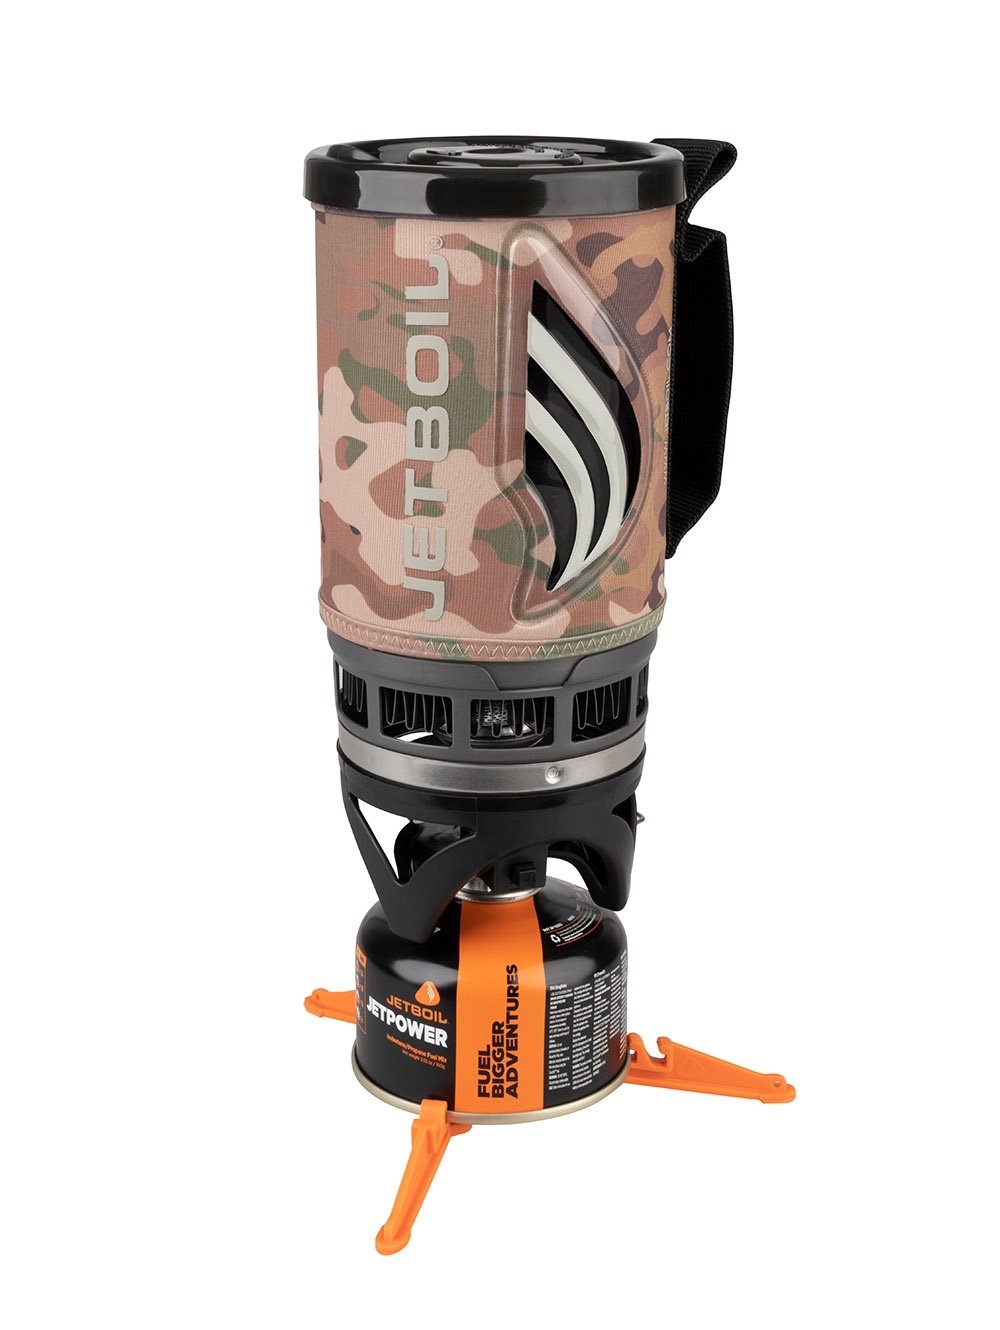 Jetboil Flash Complete Cooking System Outdoor and Survival Products Jetboil Tactical Gear Supplier Tactical Distributors Australia